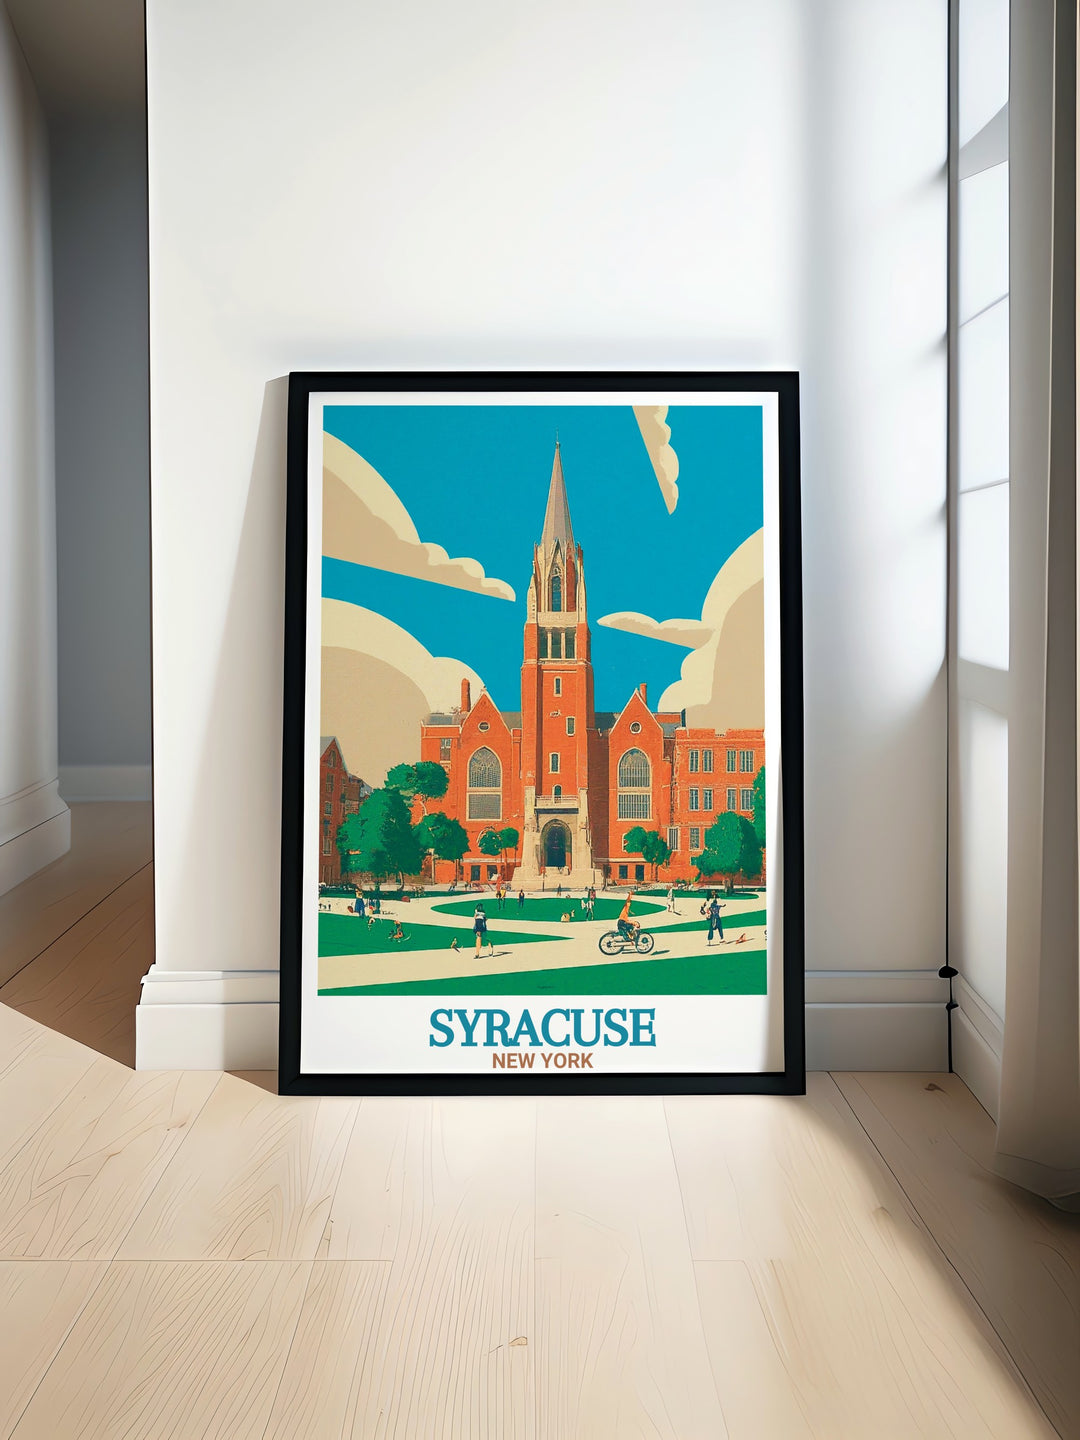 Syracuse University modern print showcasing the vibrant campus and iconic architecture perfect for home decor or as a thoughtful gift capturing the unique spirit and beauty of the university ideal for any living room or office space enhancing your interior with academic elegance